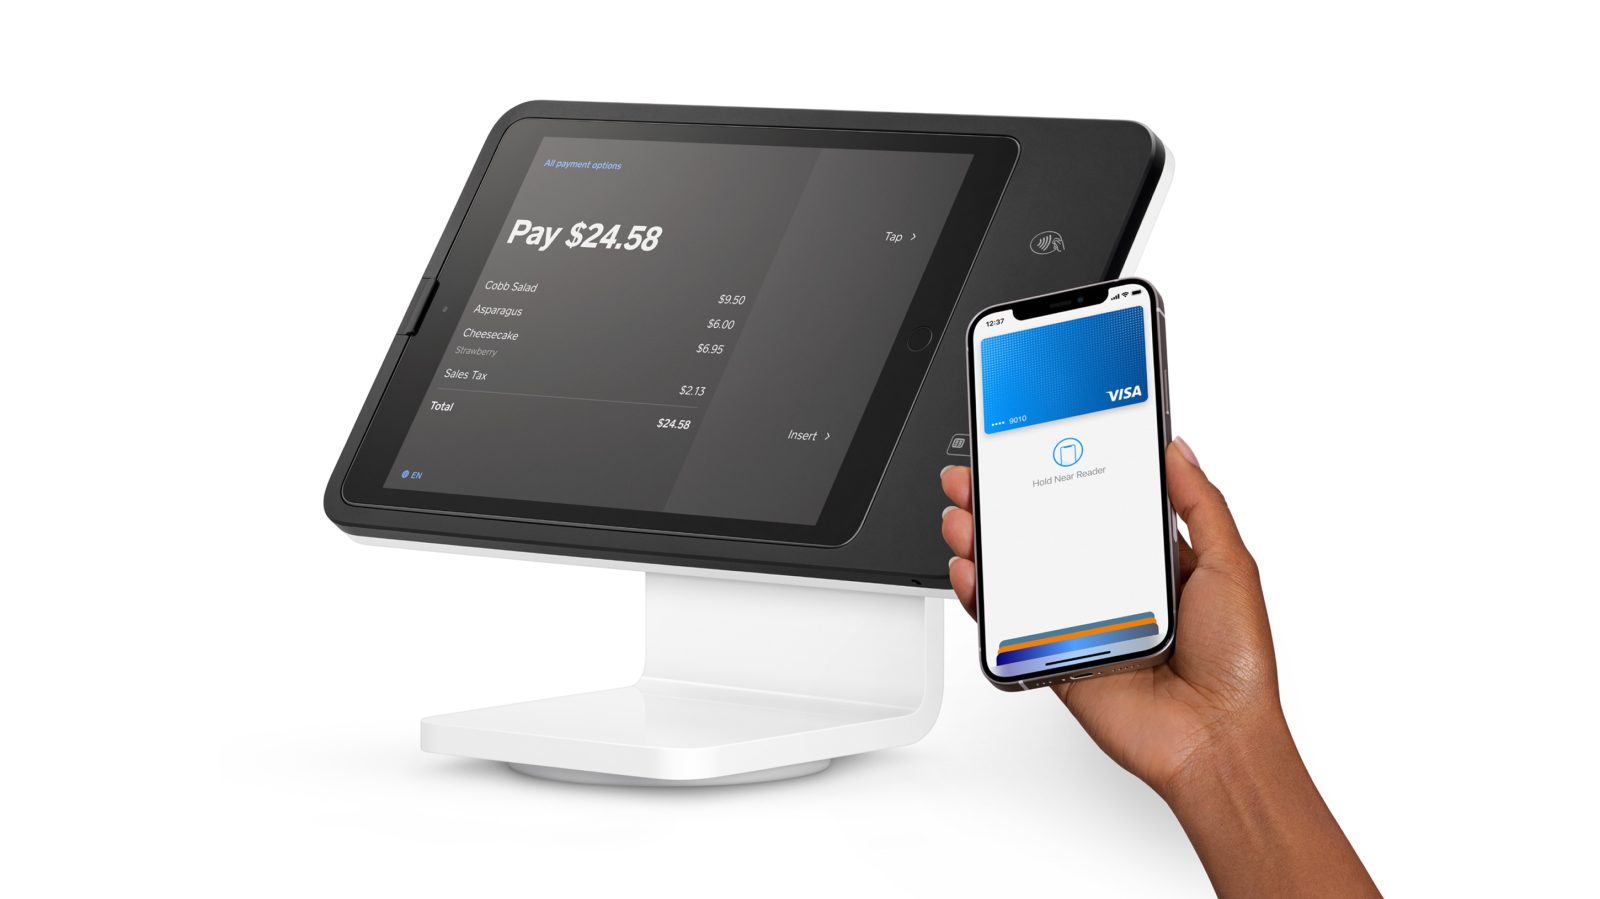 Apple Pay contactless payment services